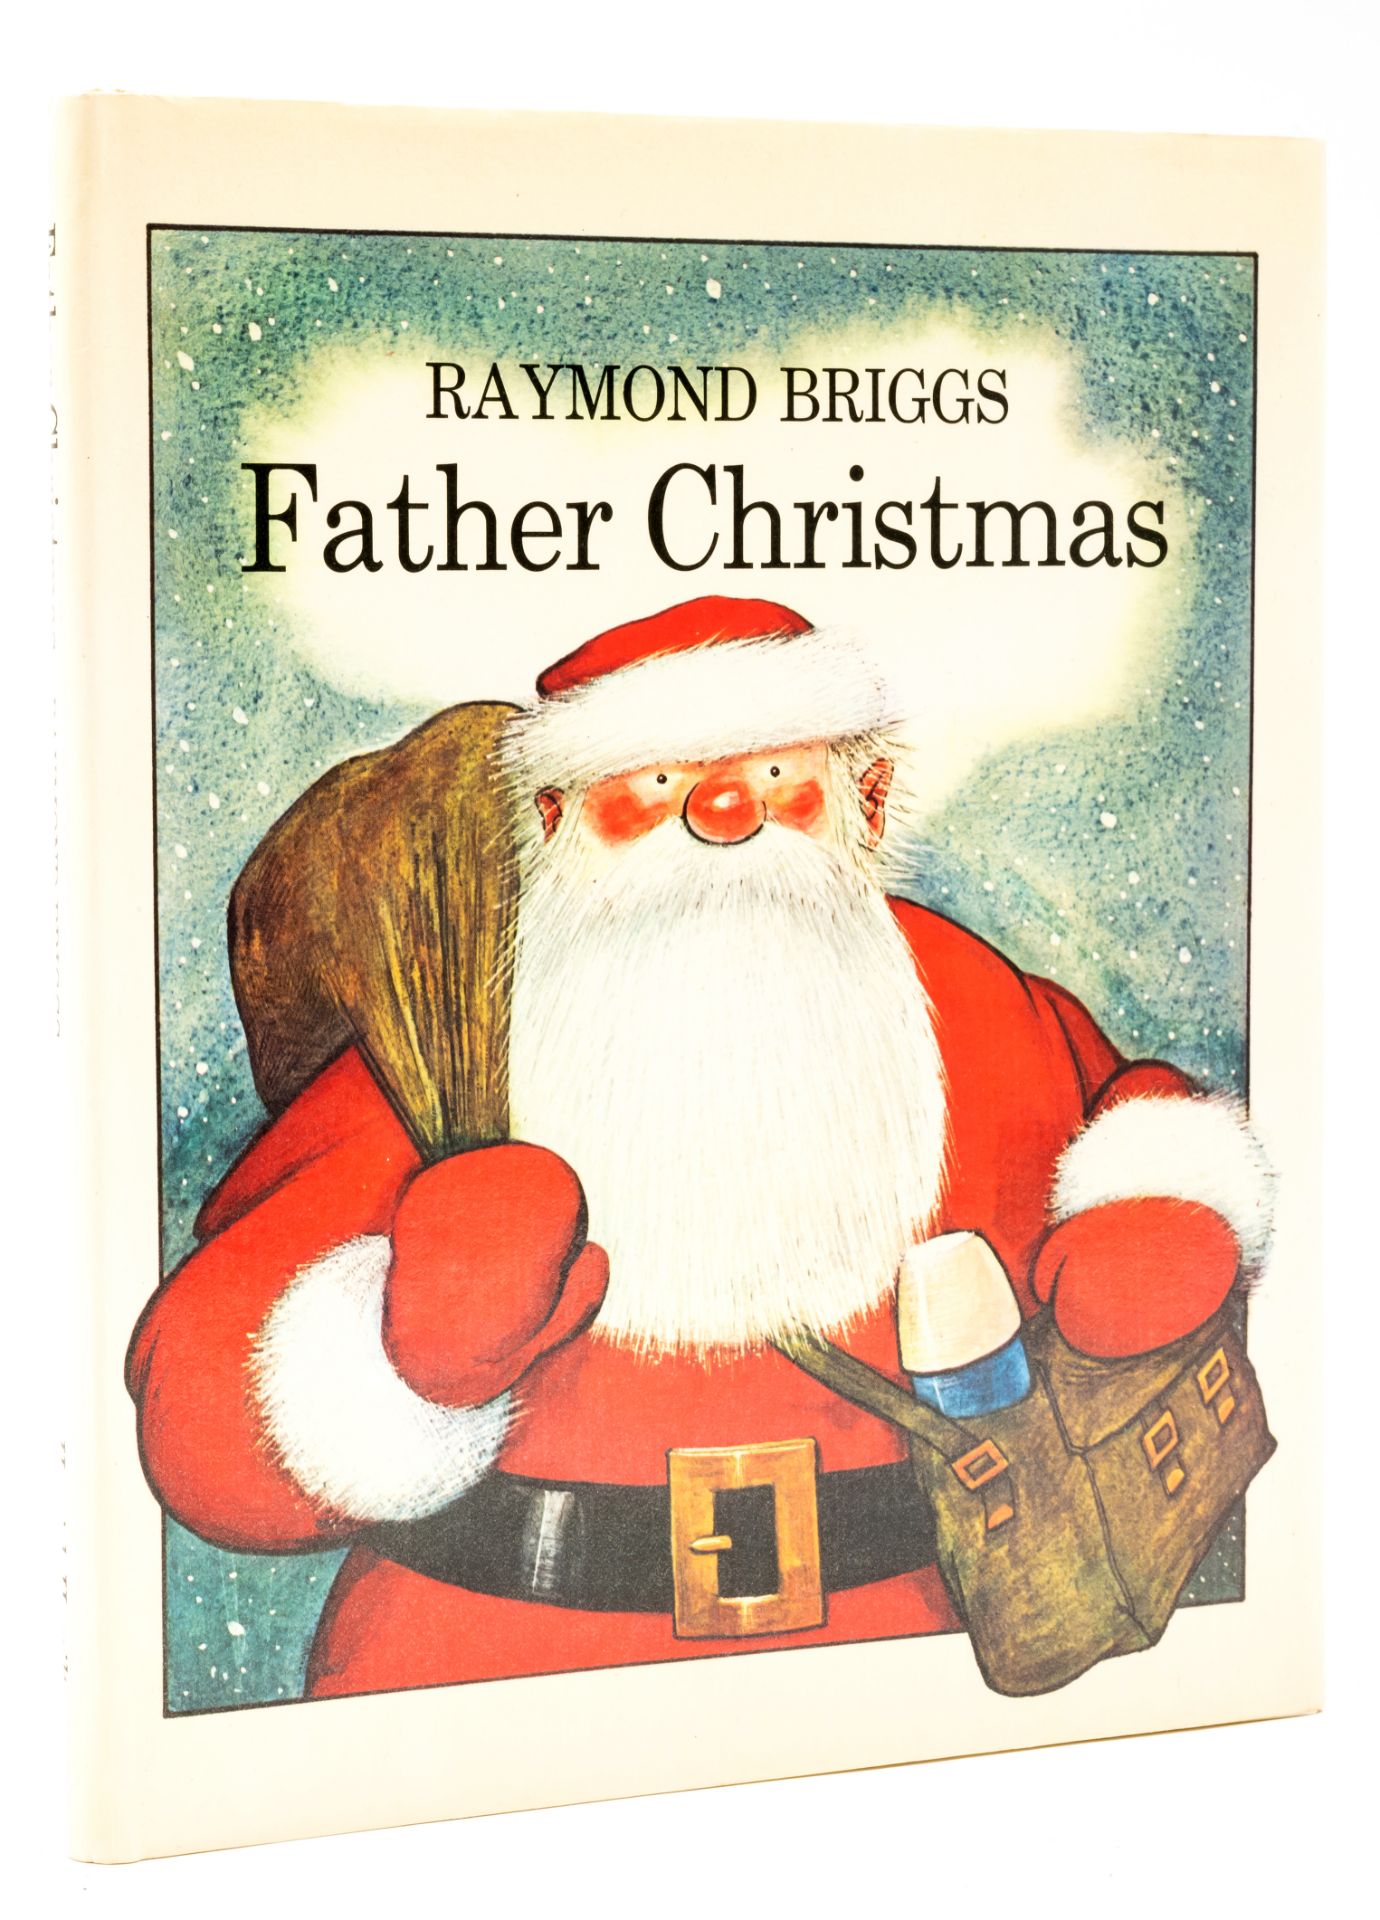 Briggs (Raymond) Father Christmas, first edition, signed presentation inscription from the author...